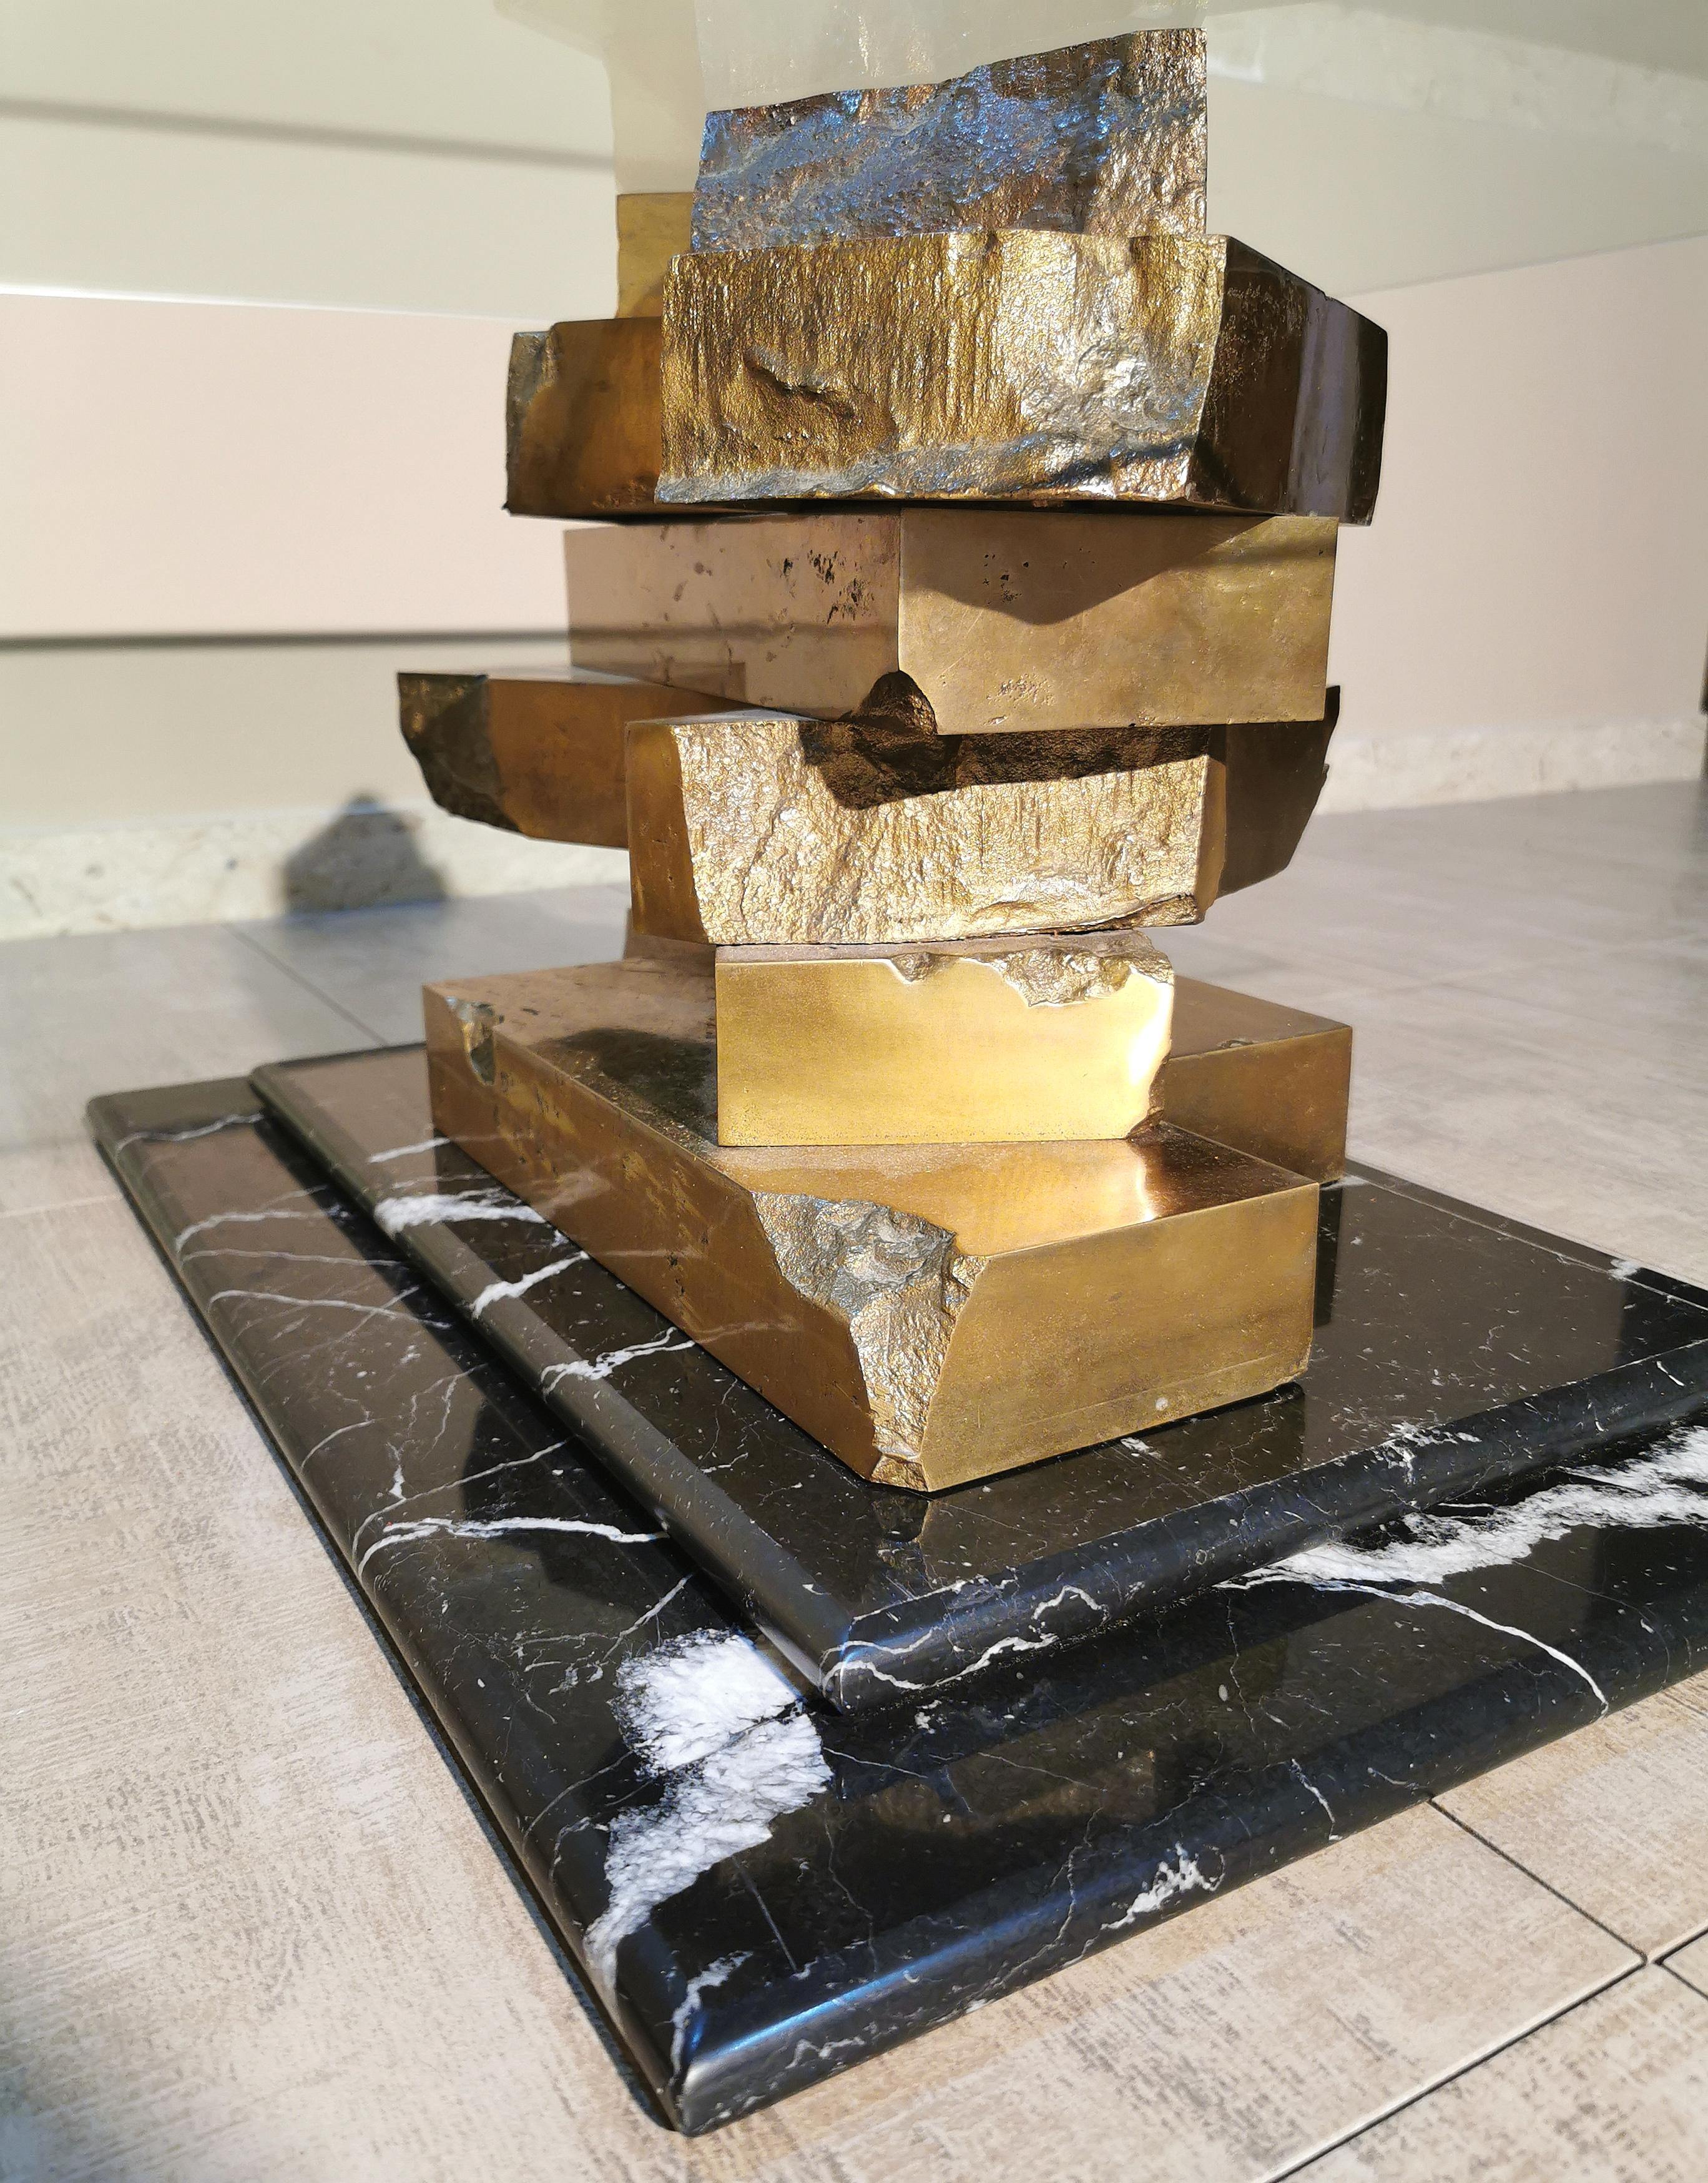 Beautiful and rare sculptural coffee table for living room and of considerable size, by an unknown designer. The coffee table has two rectangular bases of Marquinia marble with a second marble slab superimposed. On them rest two sculptures in solid